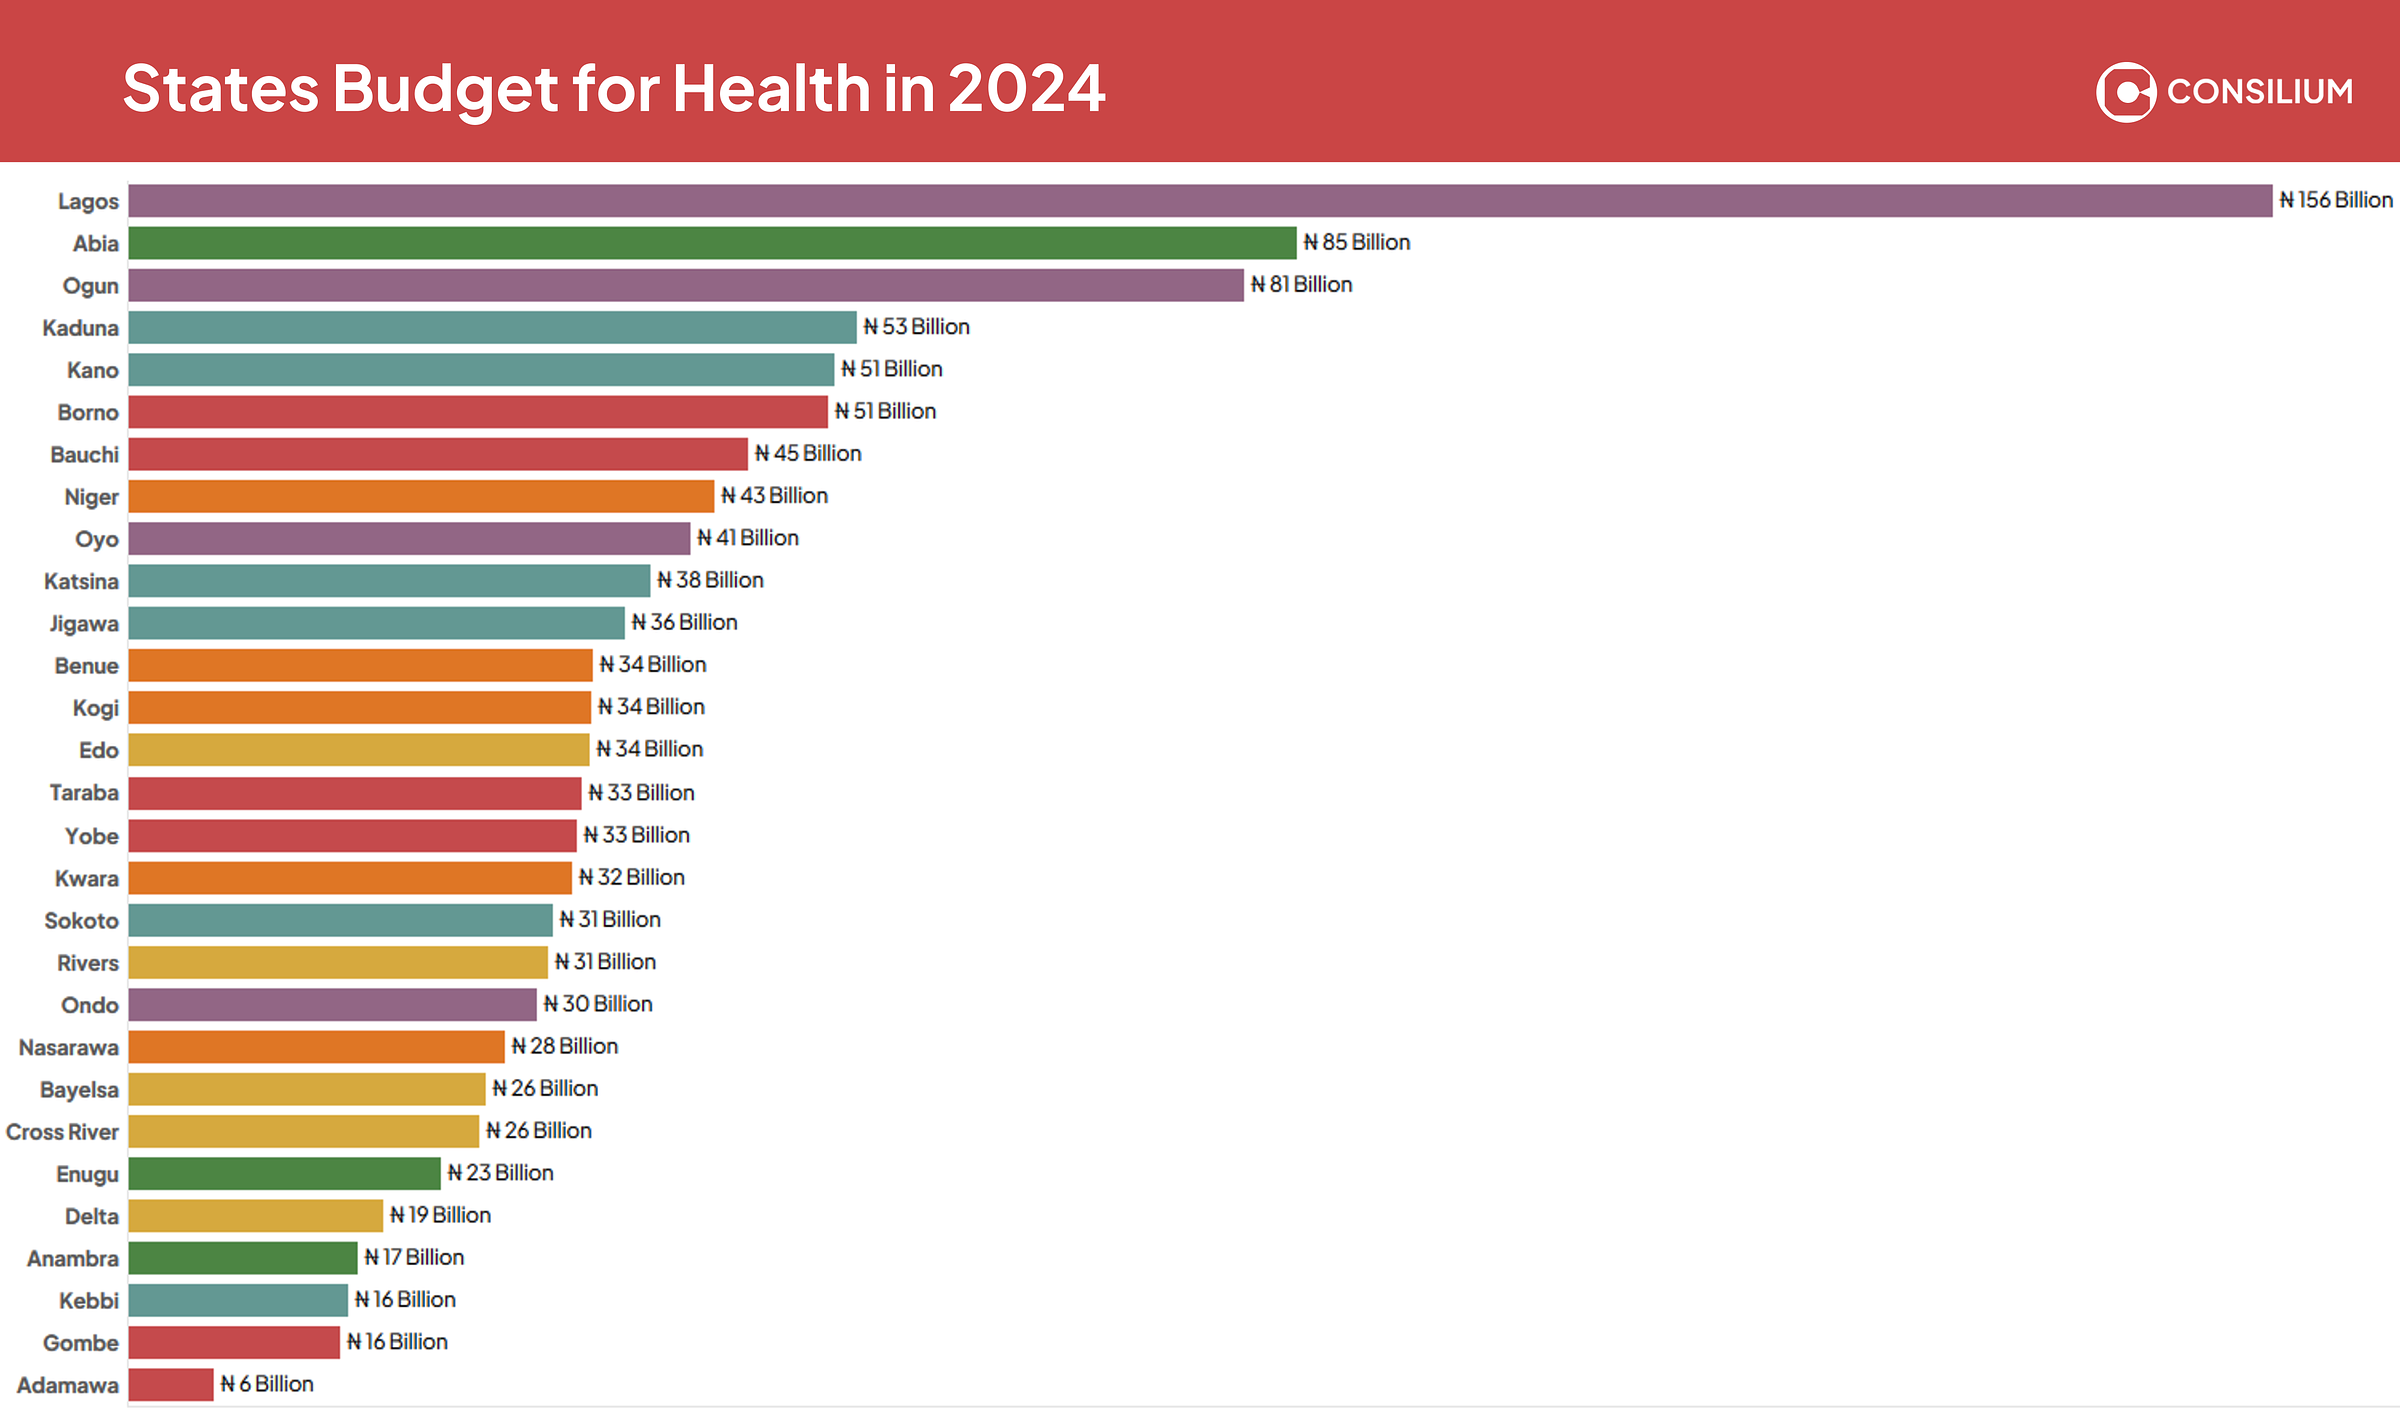 Nigerian states total budget for Health in 2024